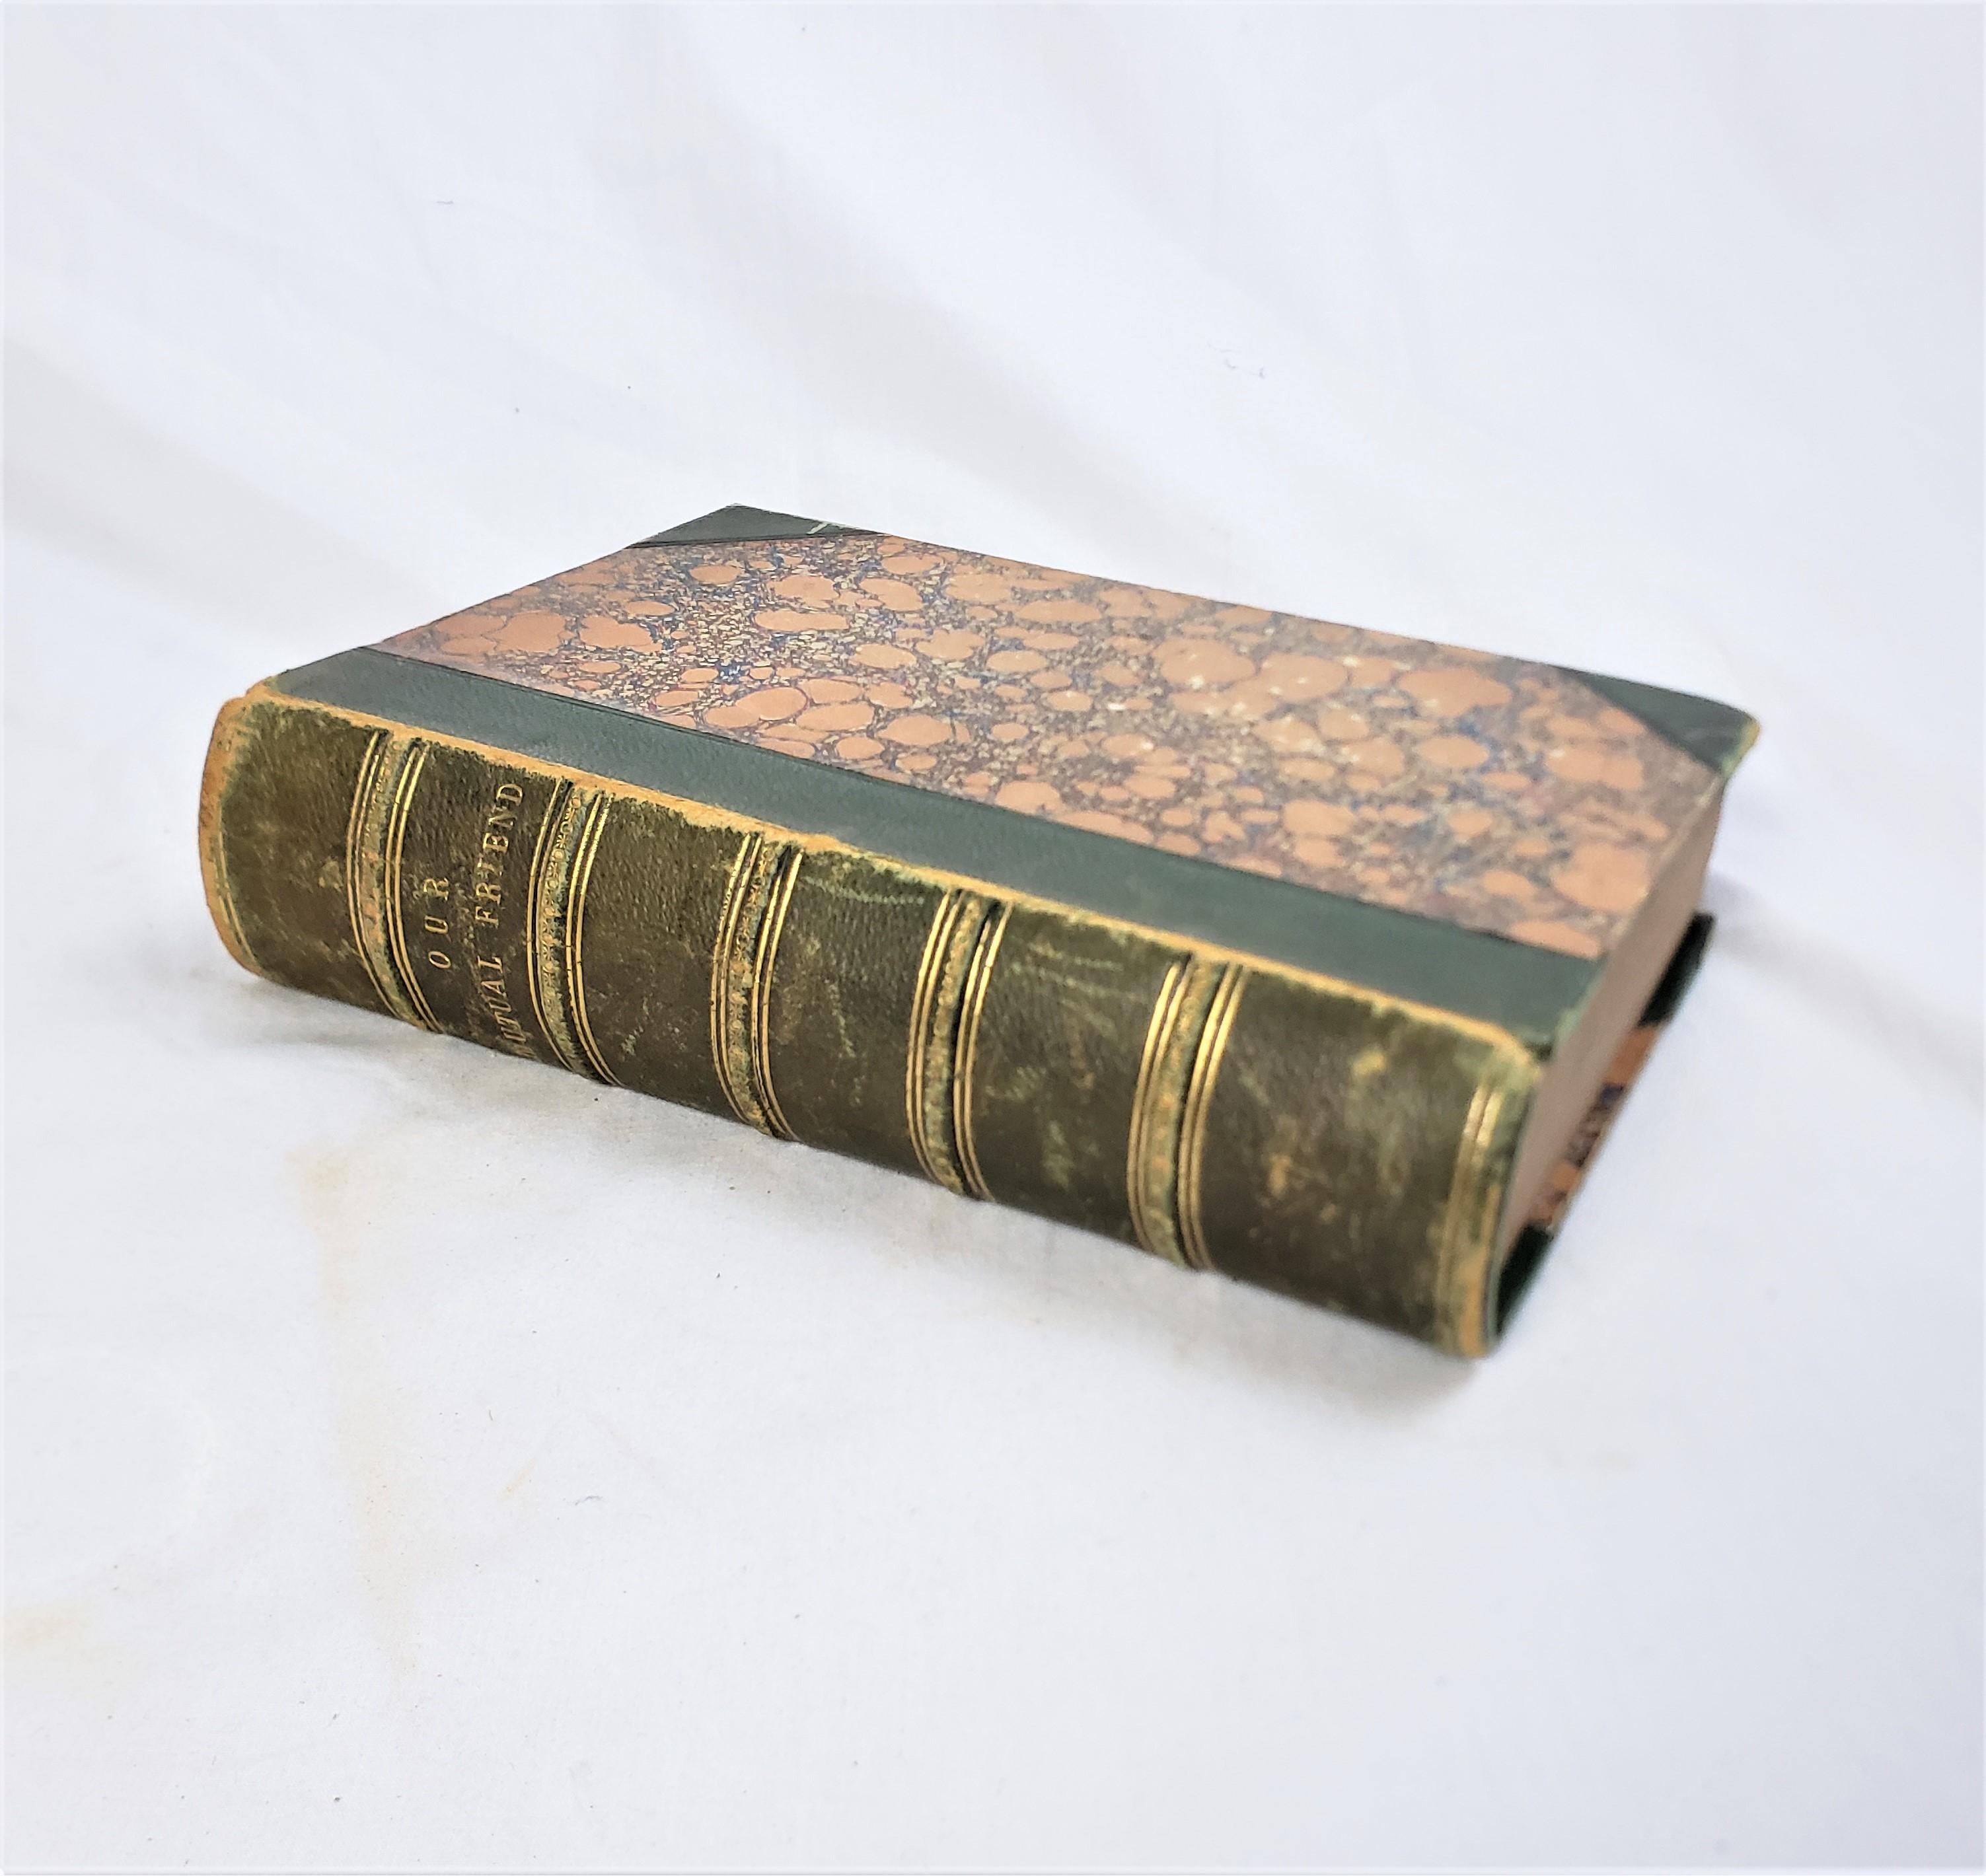 This antique 1st Edition book titled Our Mutual Friend was authored by Charles Dickens and published by Chapman and Hall of England in 1865 in the period Victorian style with etchings by Hablot  Knight Browne 